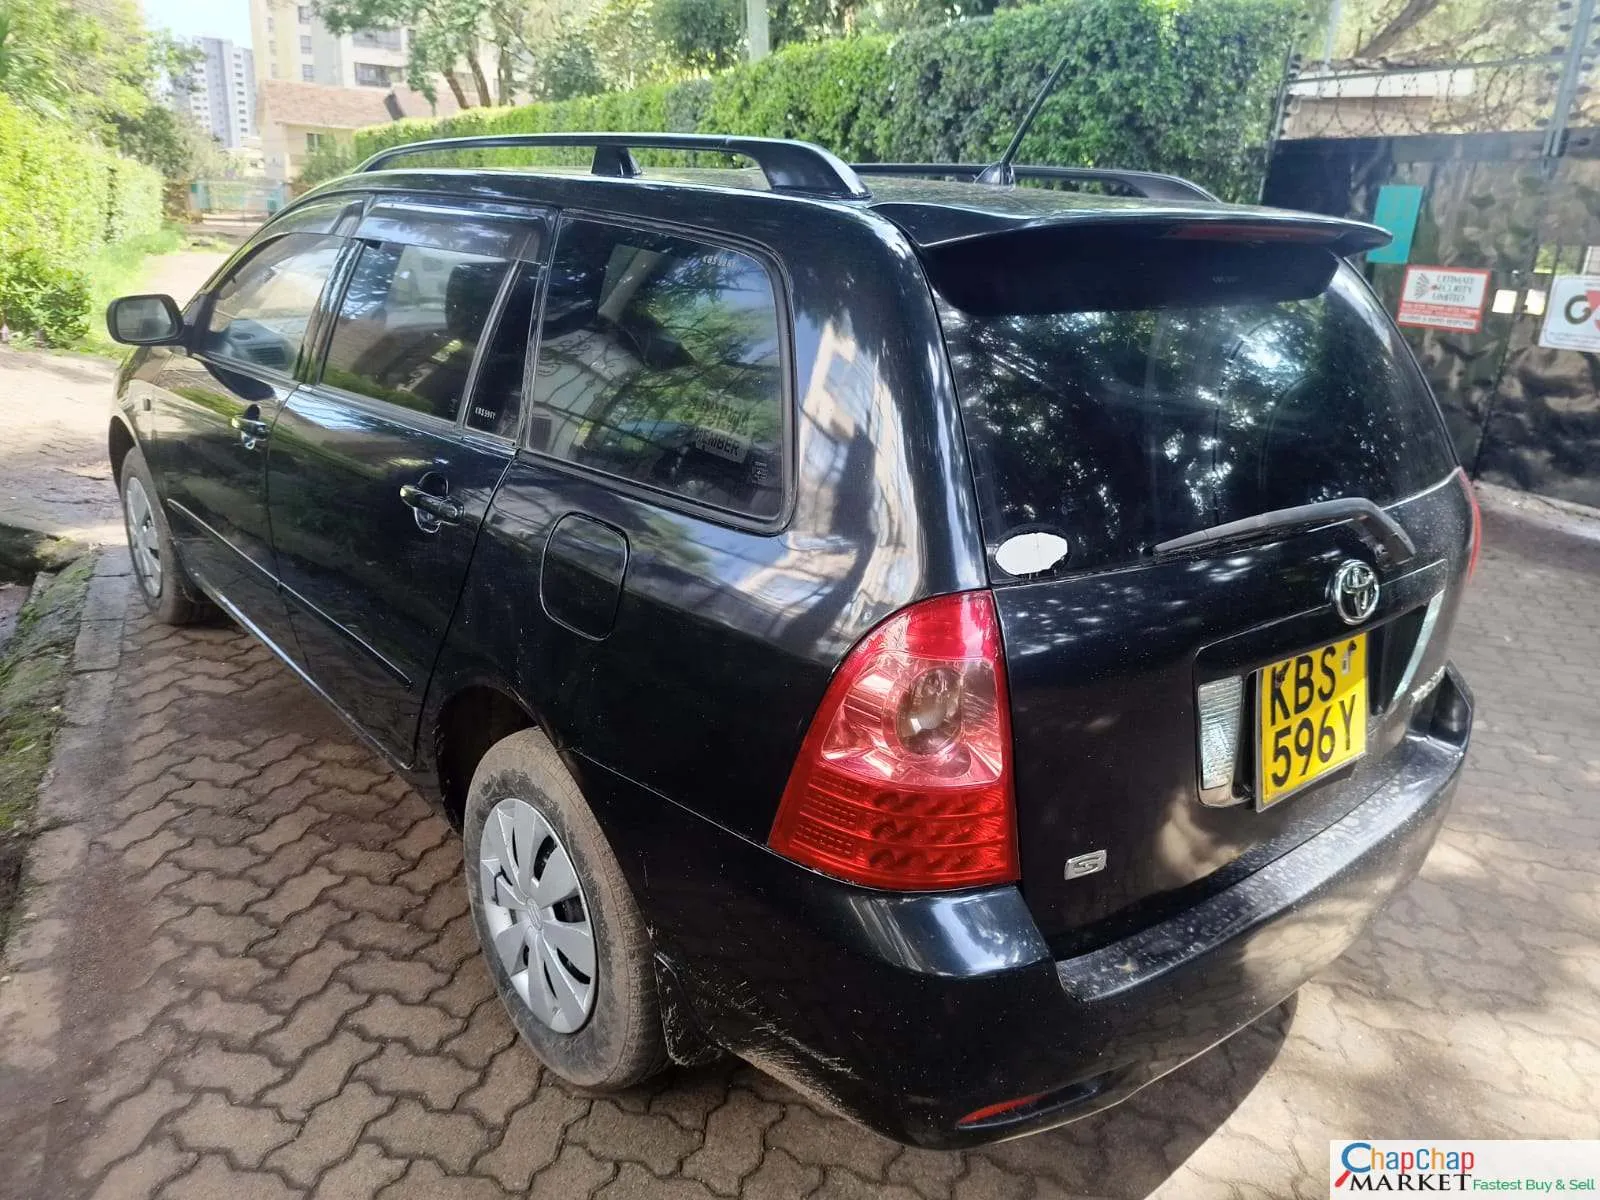 Toyota fielder for sale in kenya You Pay 30% Deposit Trade in OK Wow hire purchase installments